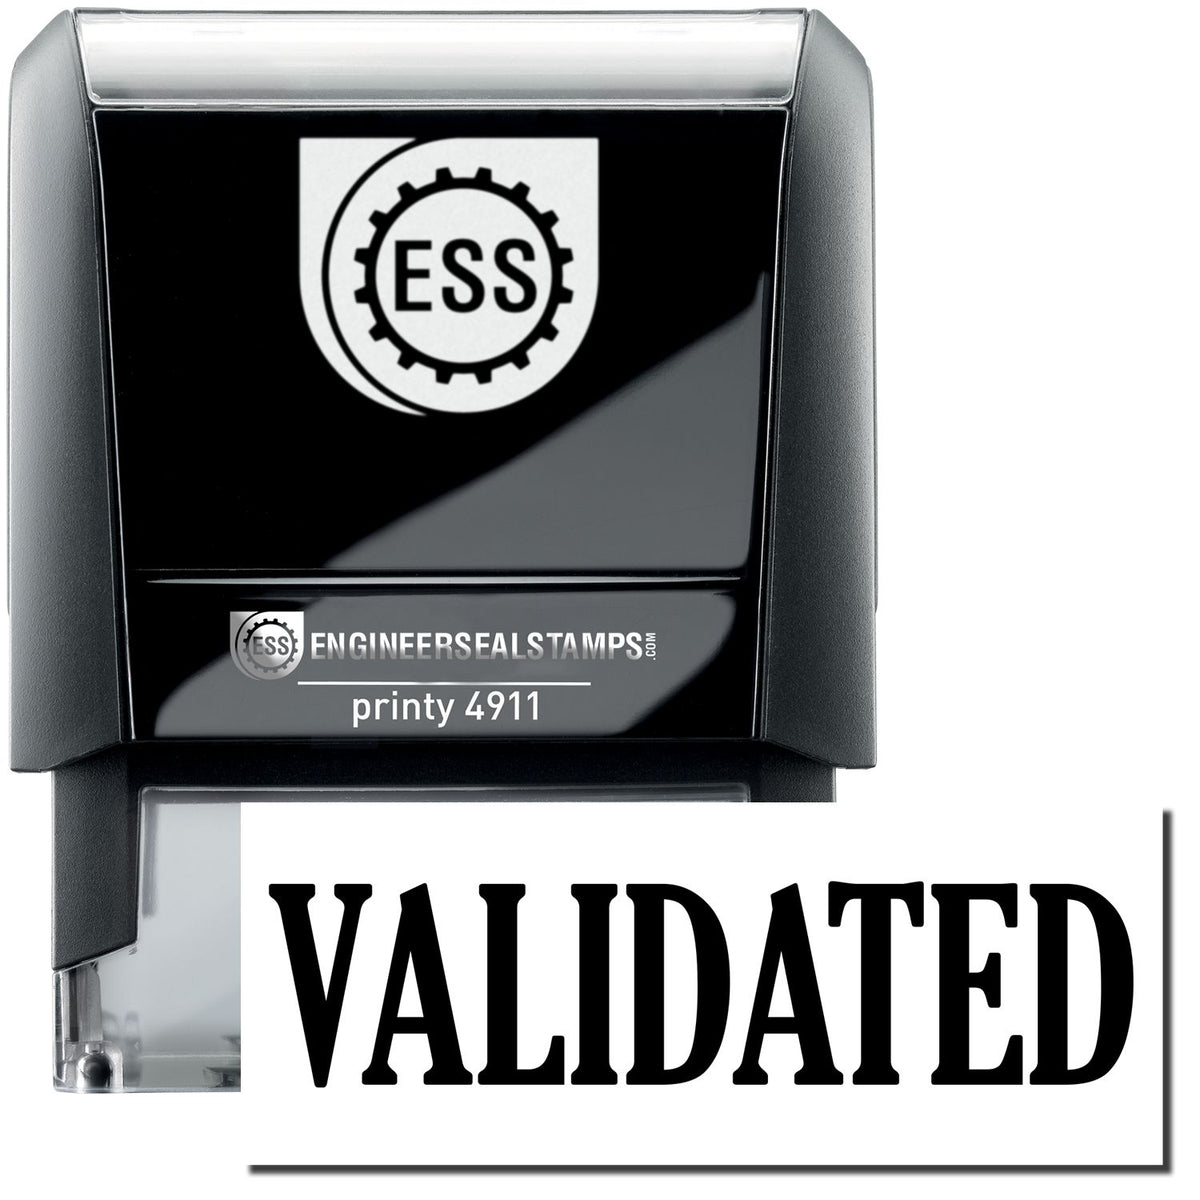 A self-inking stamp with a stamped image showing how the text &quot;VALIDATED&quot; is displayed after stamping.